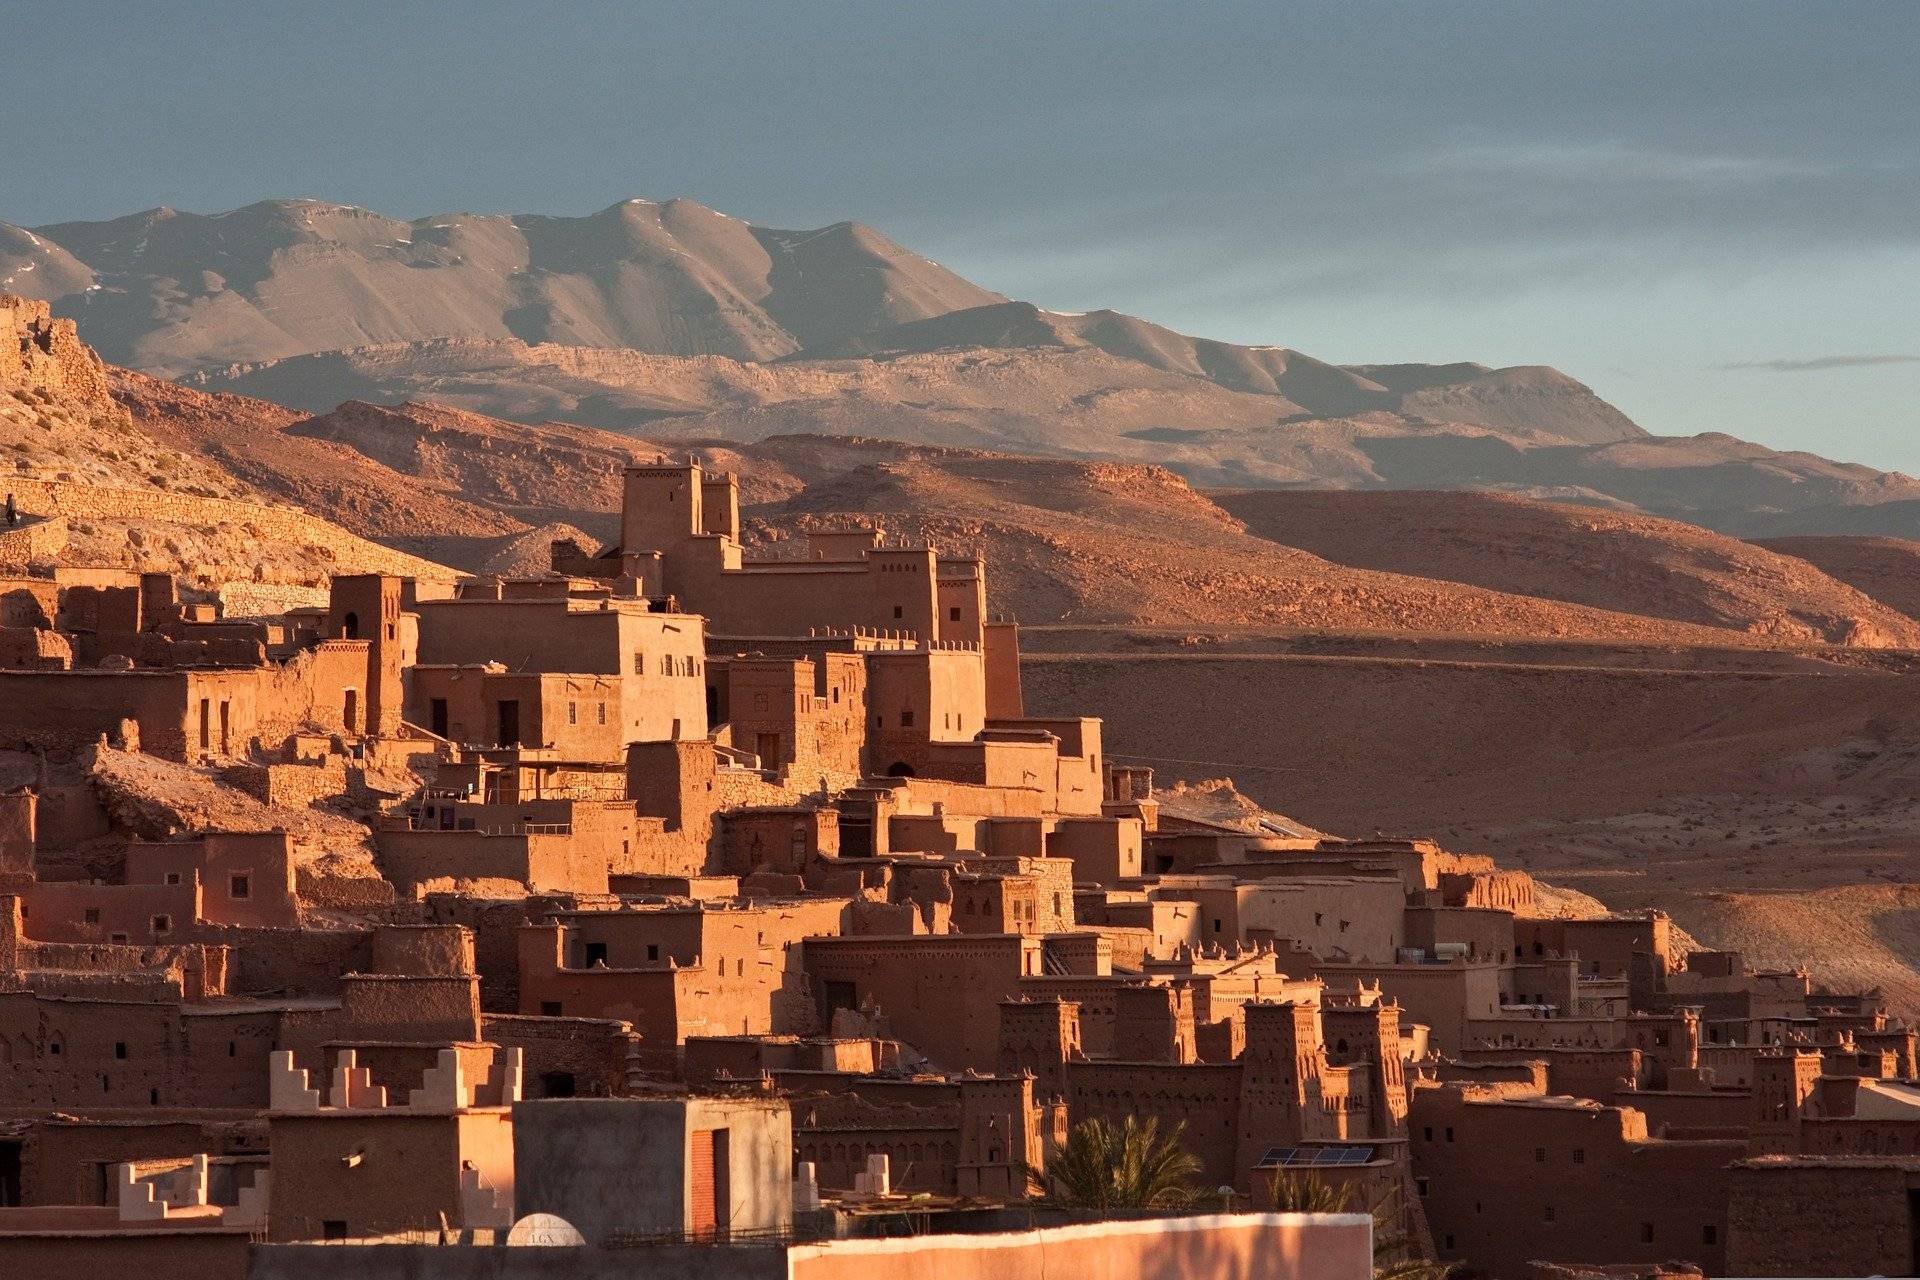 morocco g7c31b851f 1920 - Morocco Private Tours - Best Morocco Tours